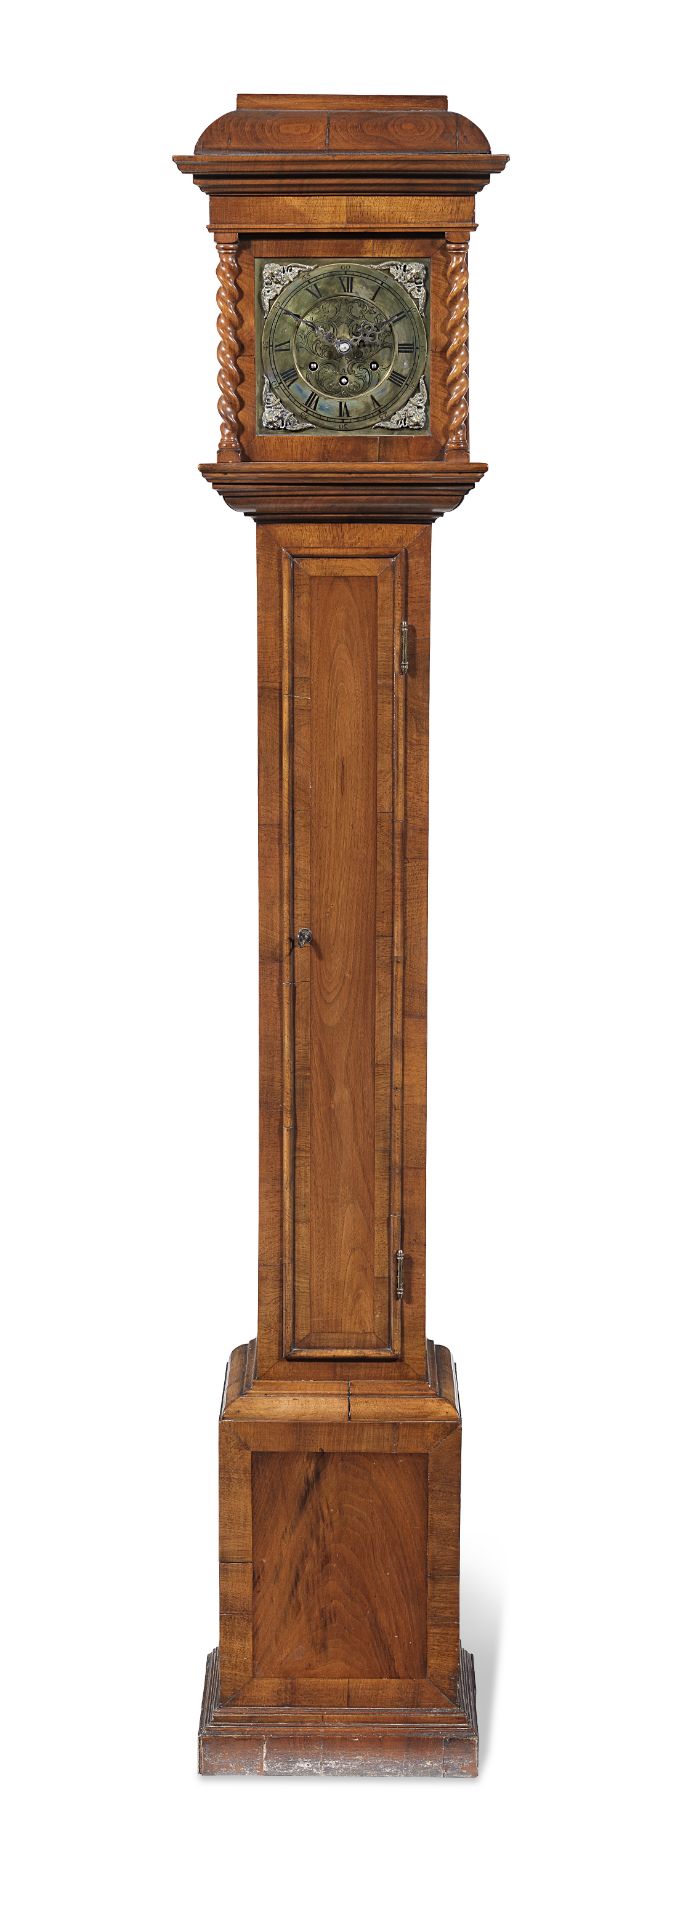 A small early 20th century walnut Westminster chiming longcase clock in the late 17th century style